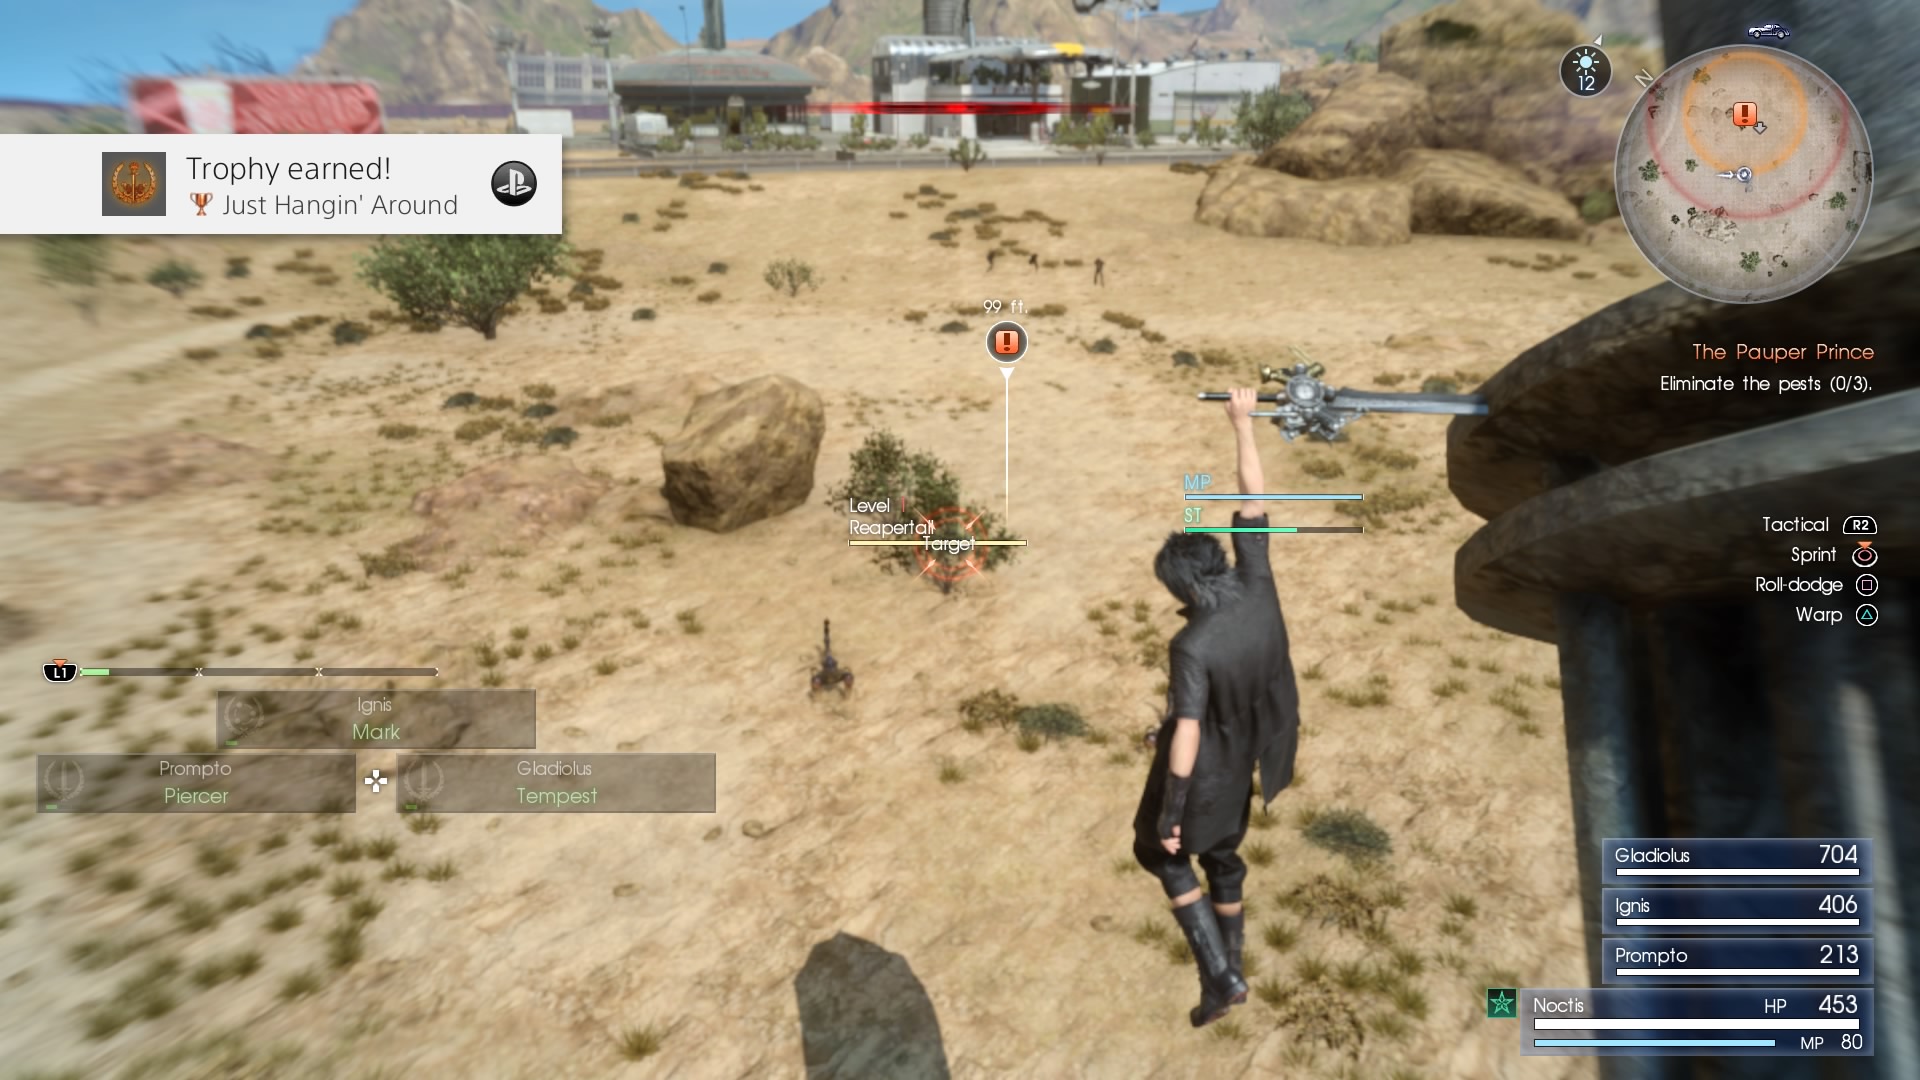 Final Fantasy XV — First 45 Minutes of SPOILER-FREE Gameplay